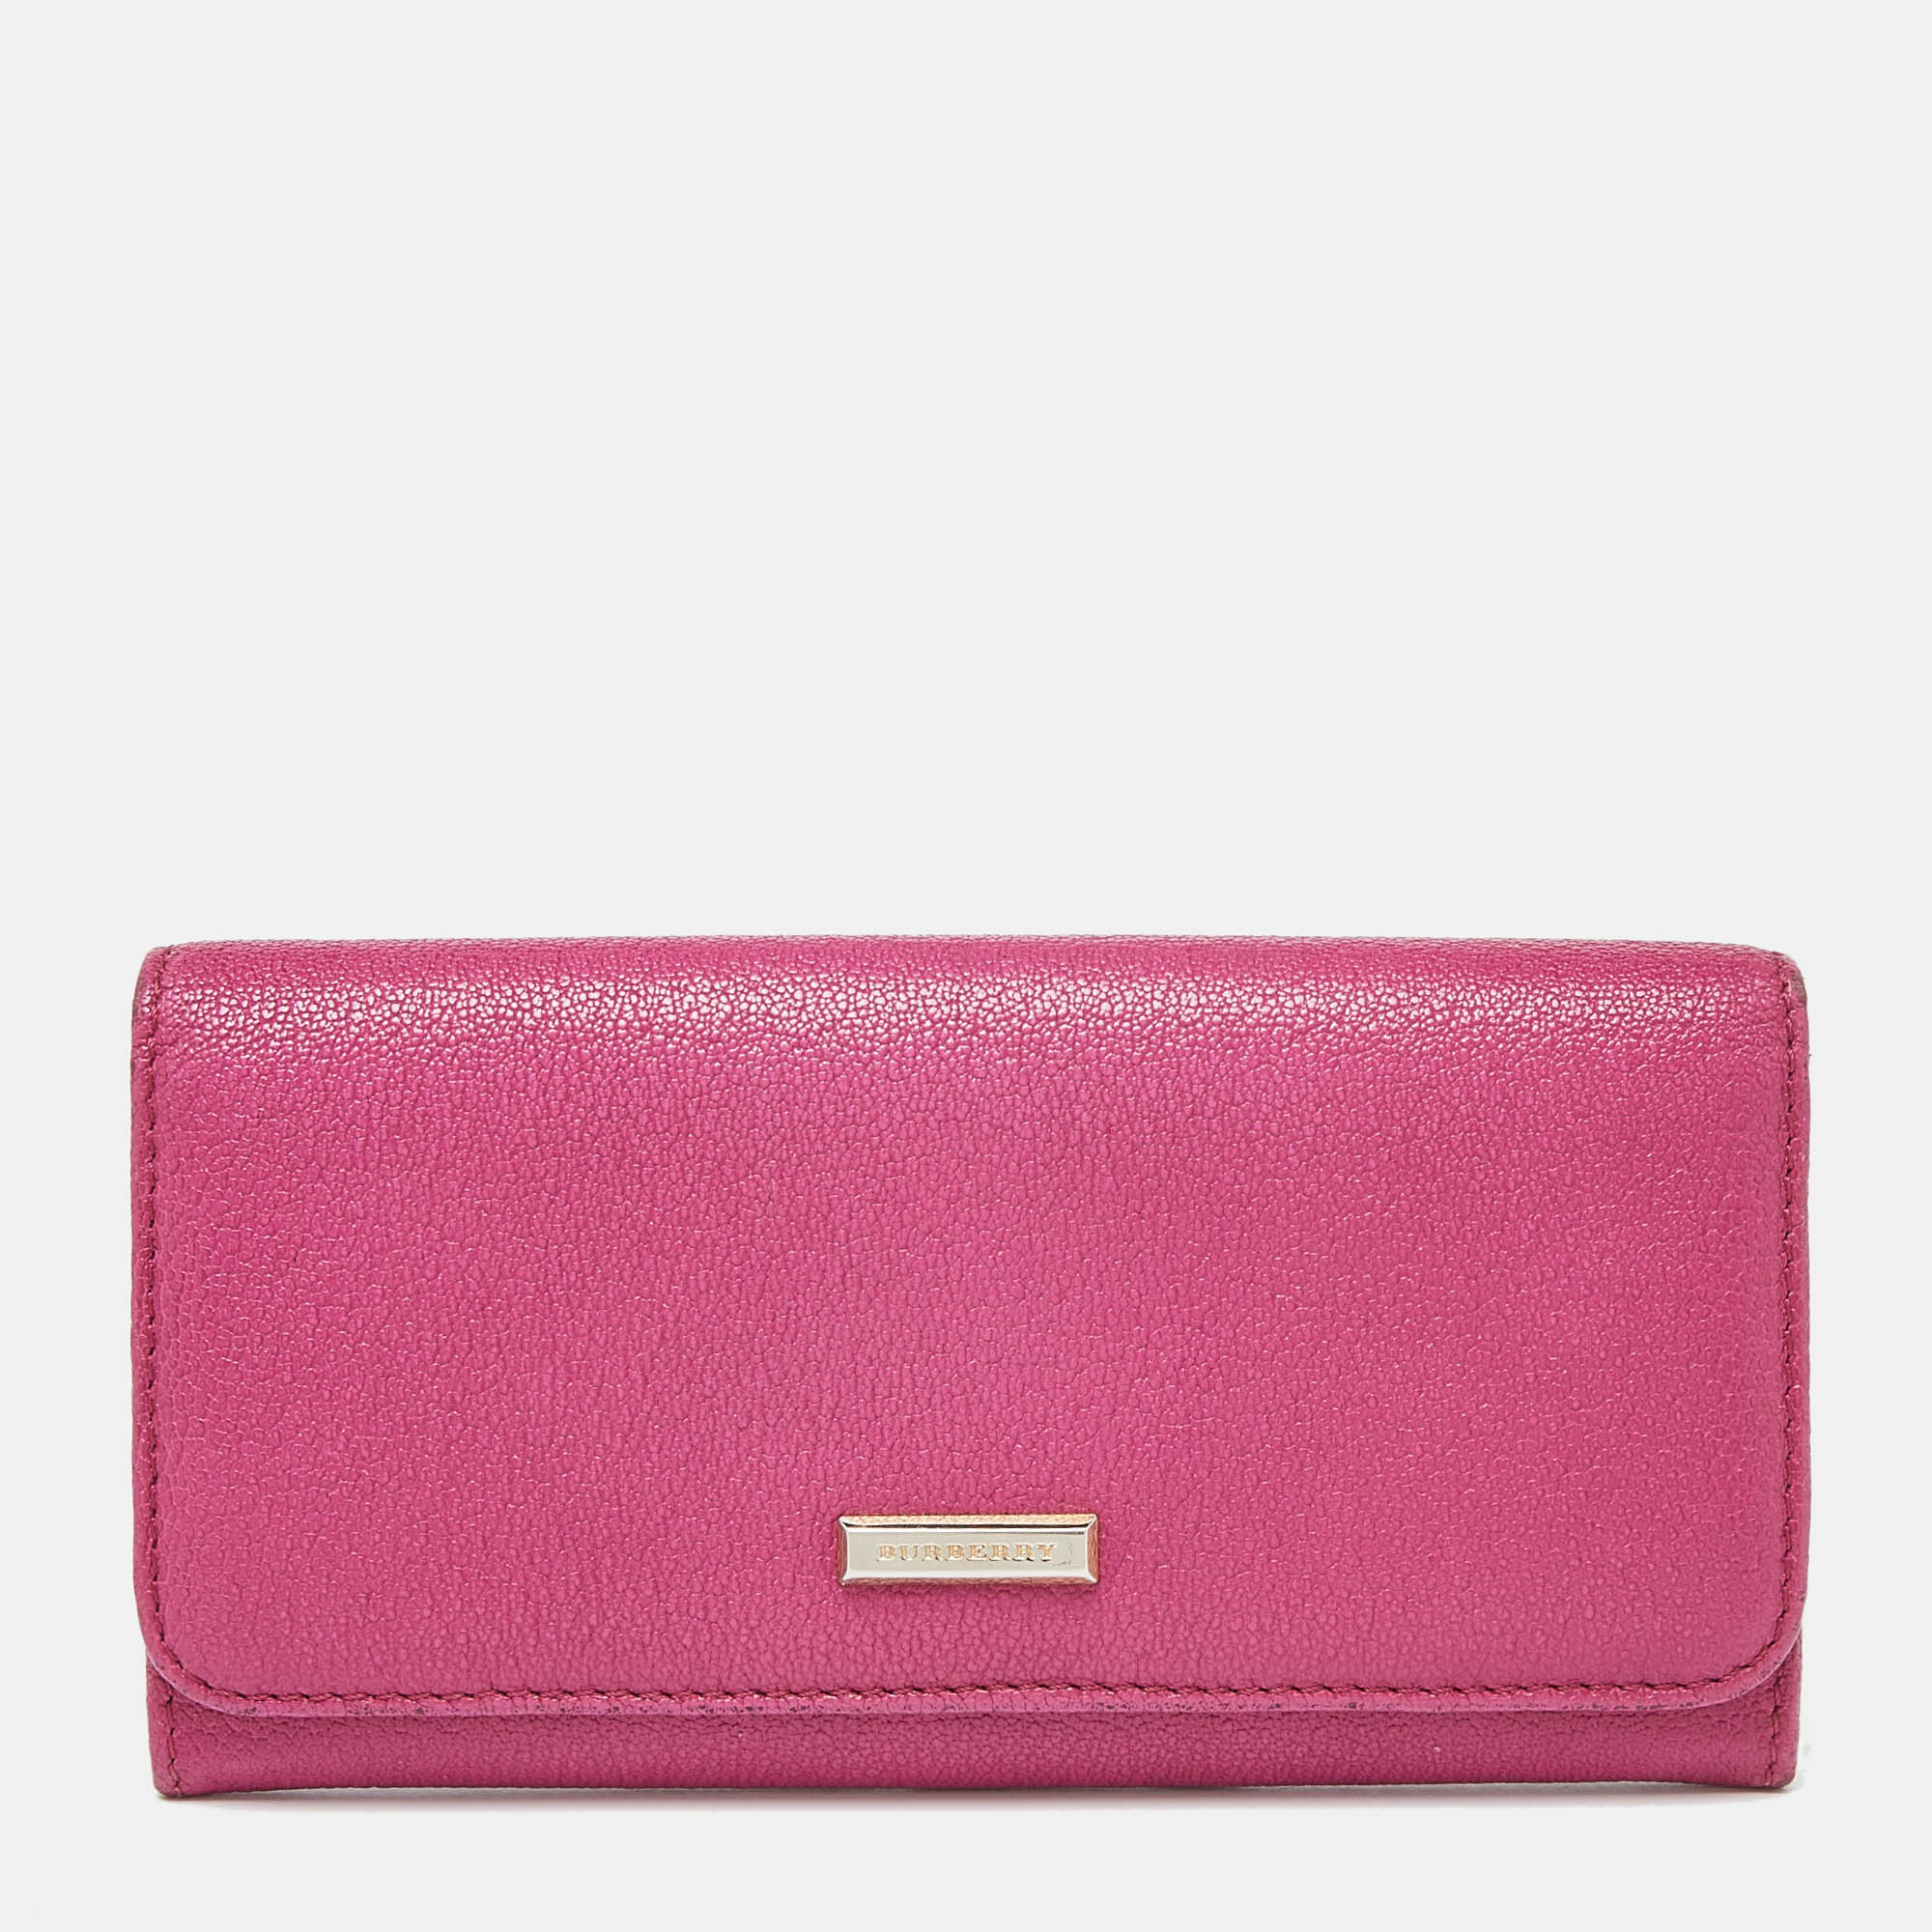 Pre-owned Burberry Pink Leather Flap Continental Wallet